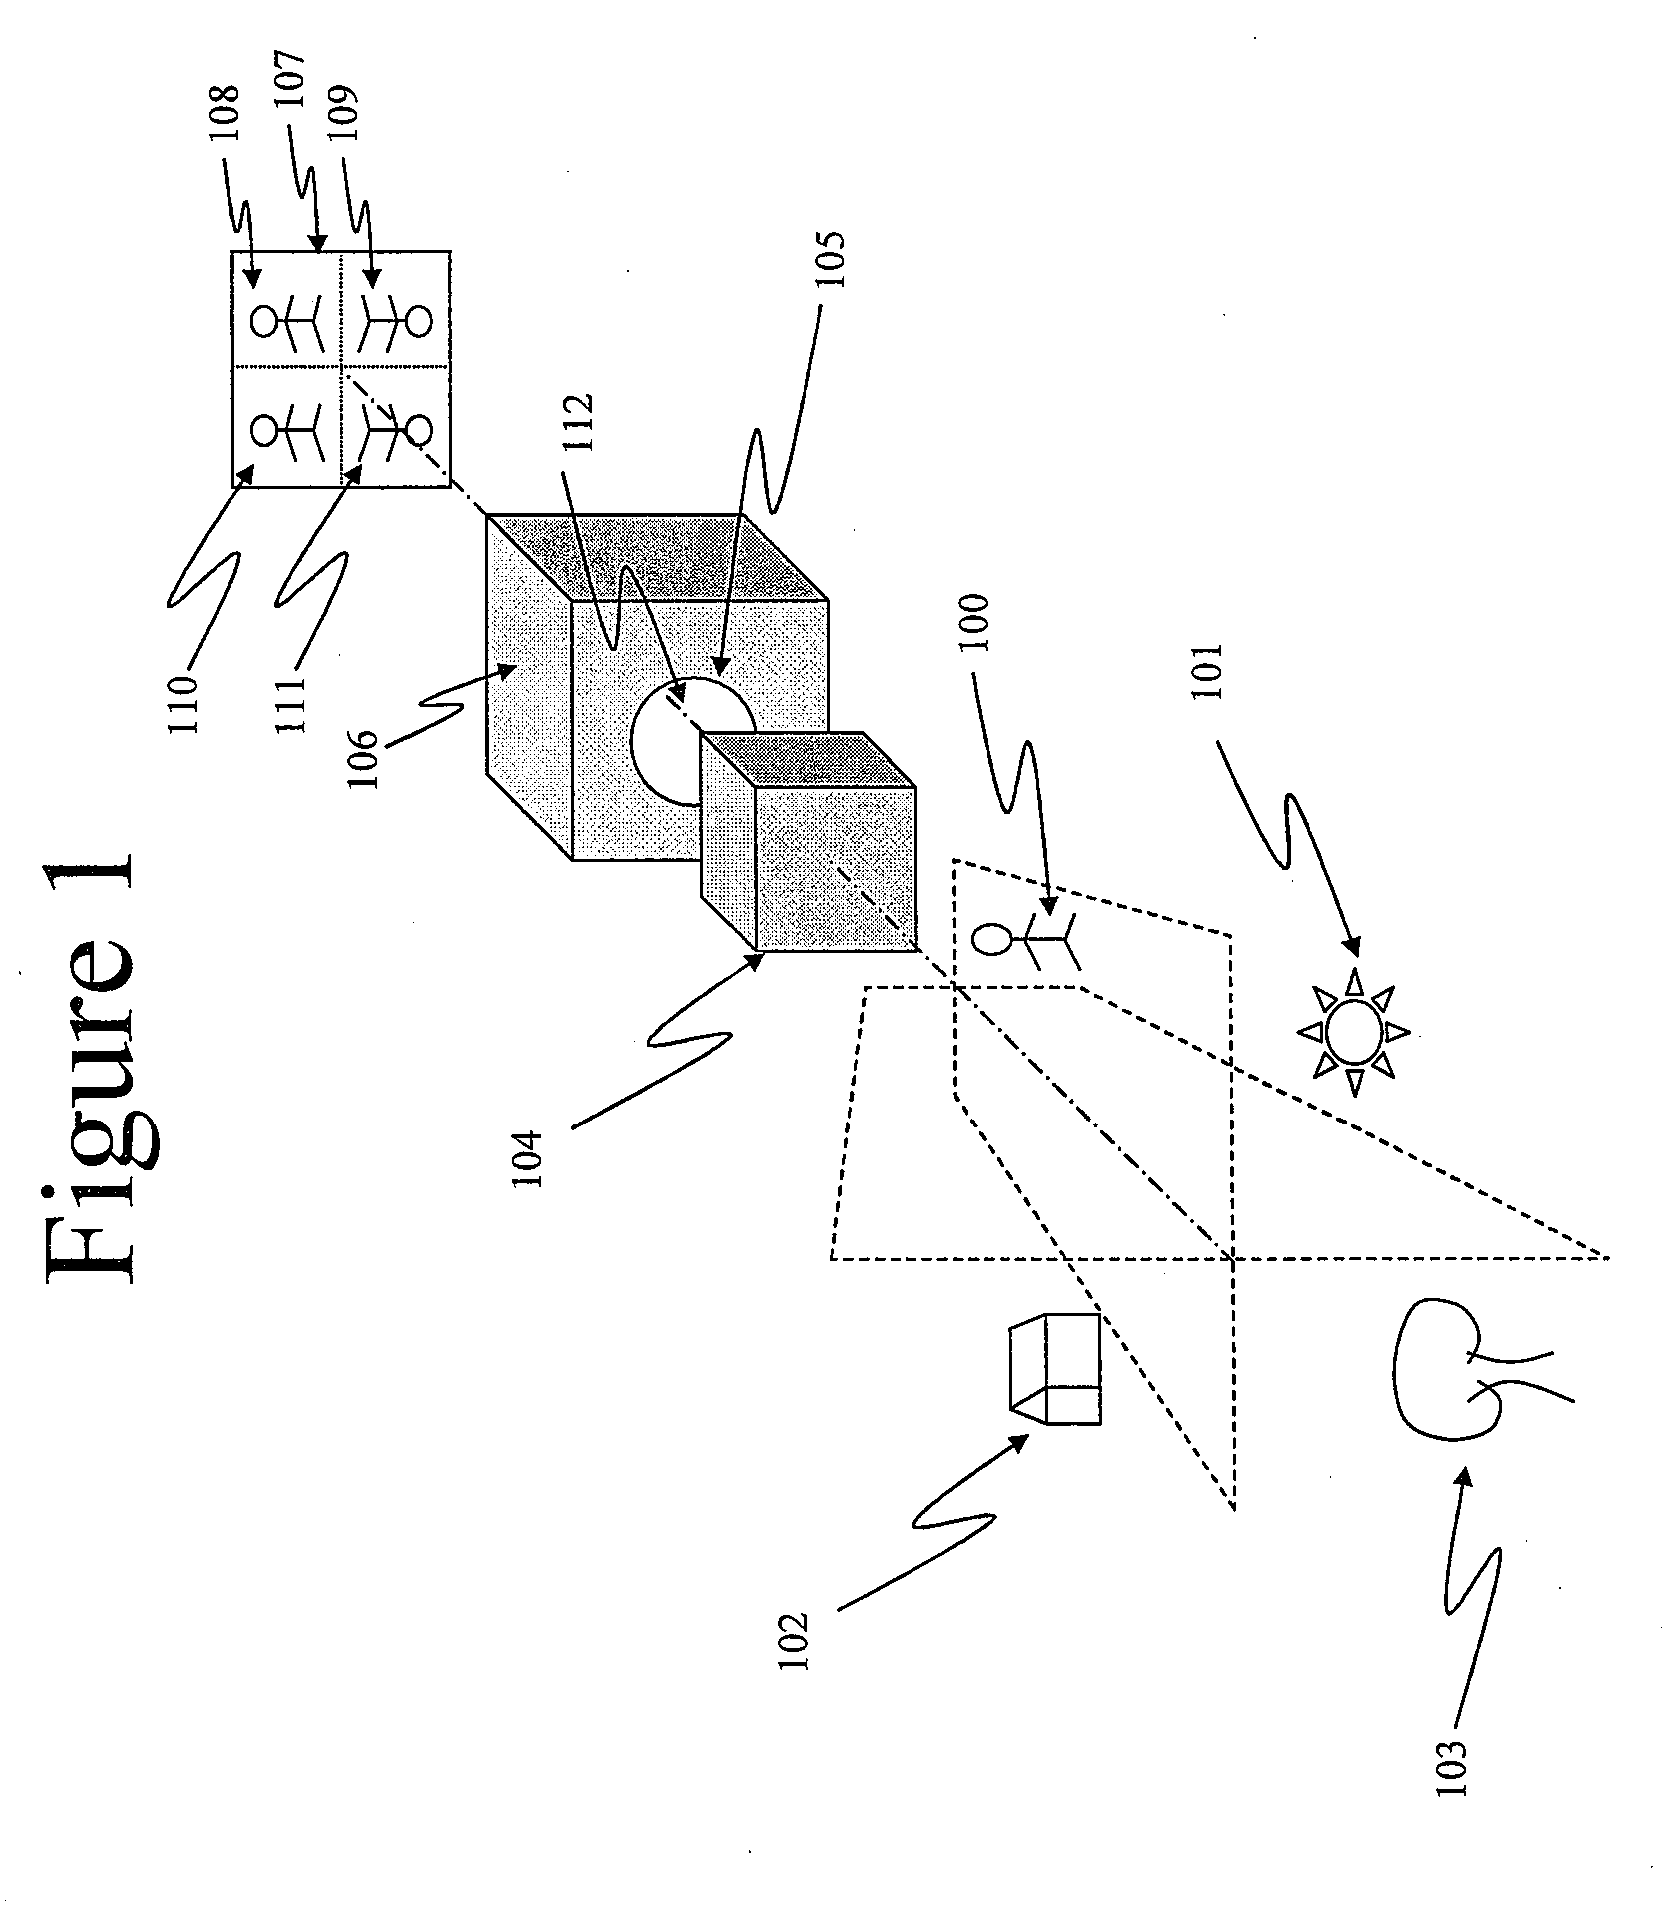 Apparatus and method for simultaneously acquiring multiple images with a given camera